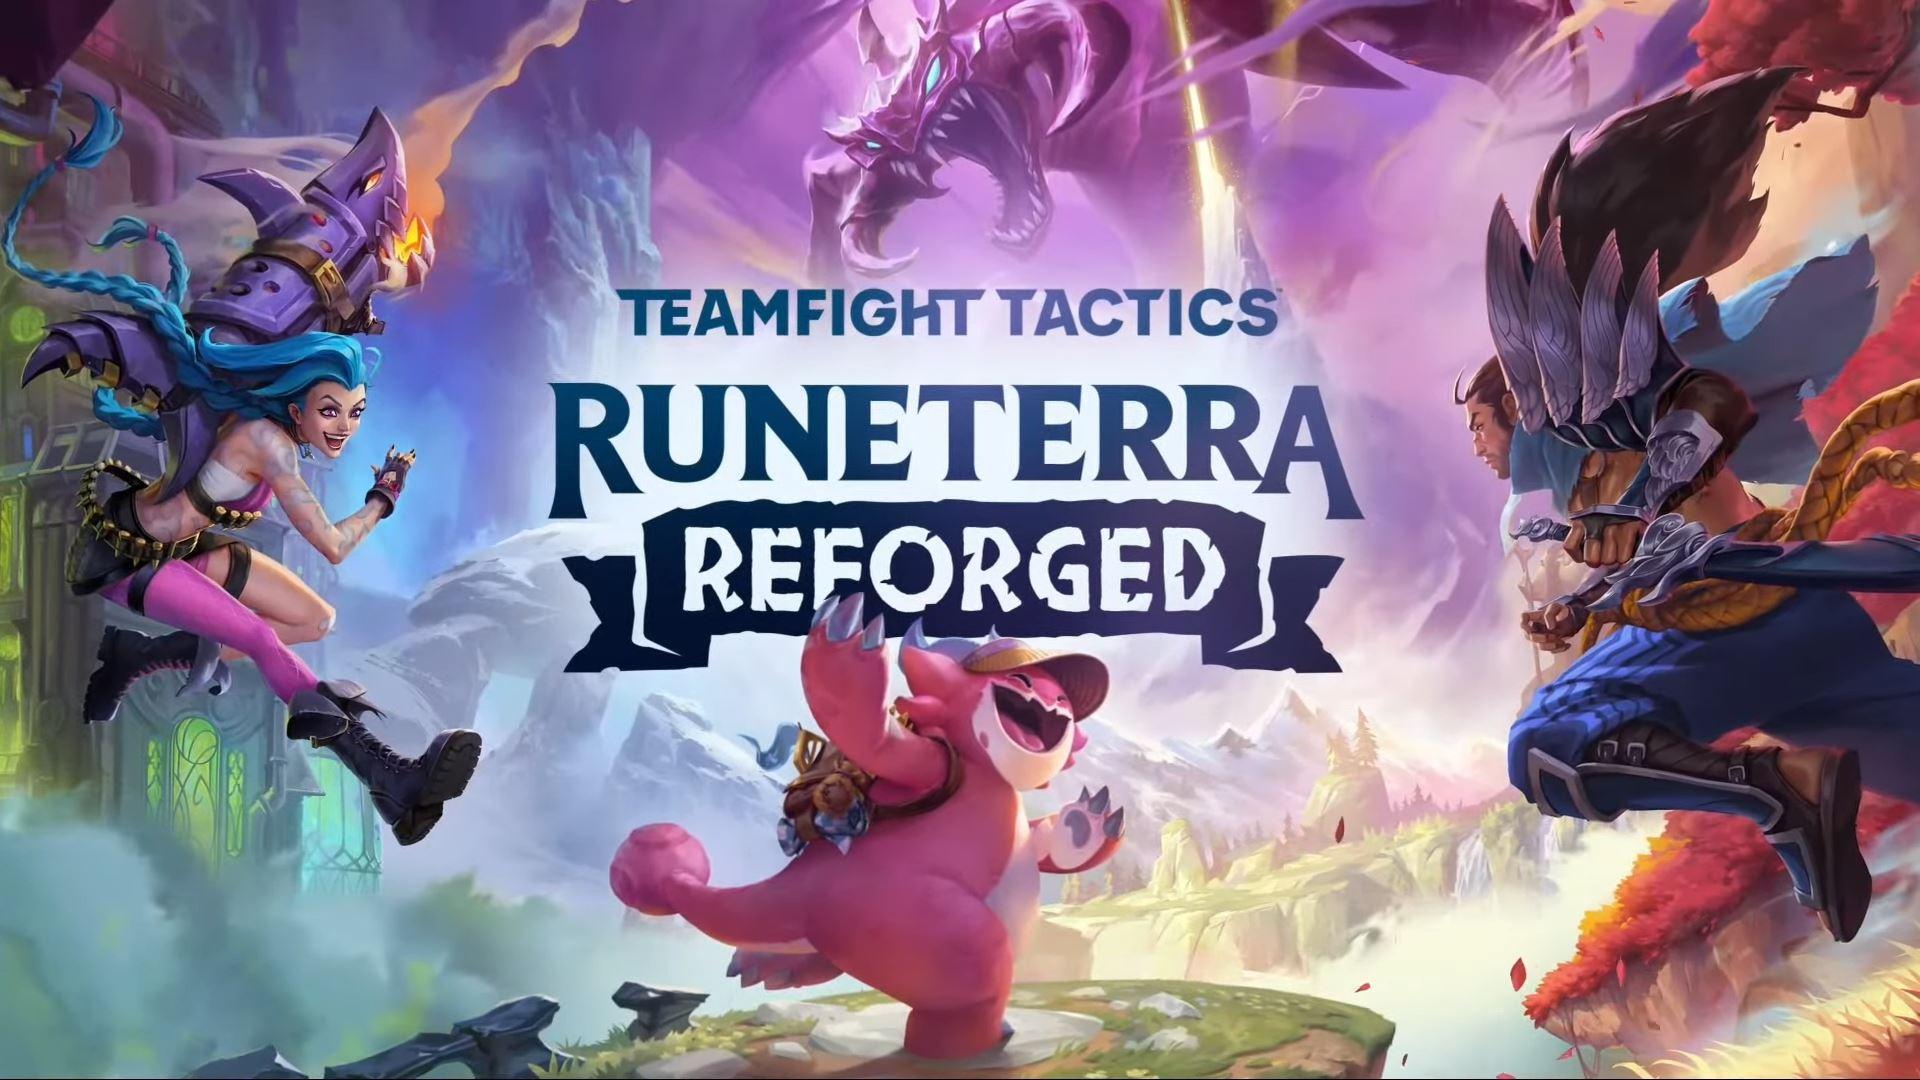 Jhin is coming to Legends of Runeterra, breaking regional rules - Dot  Esports